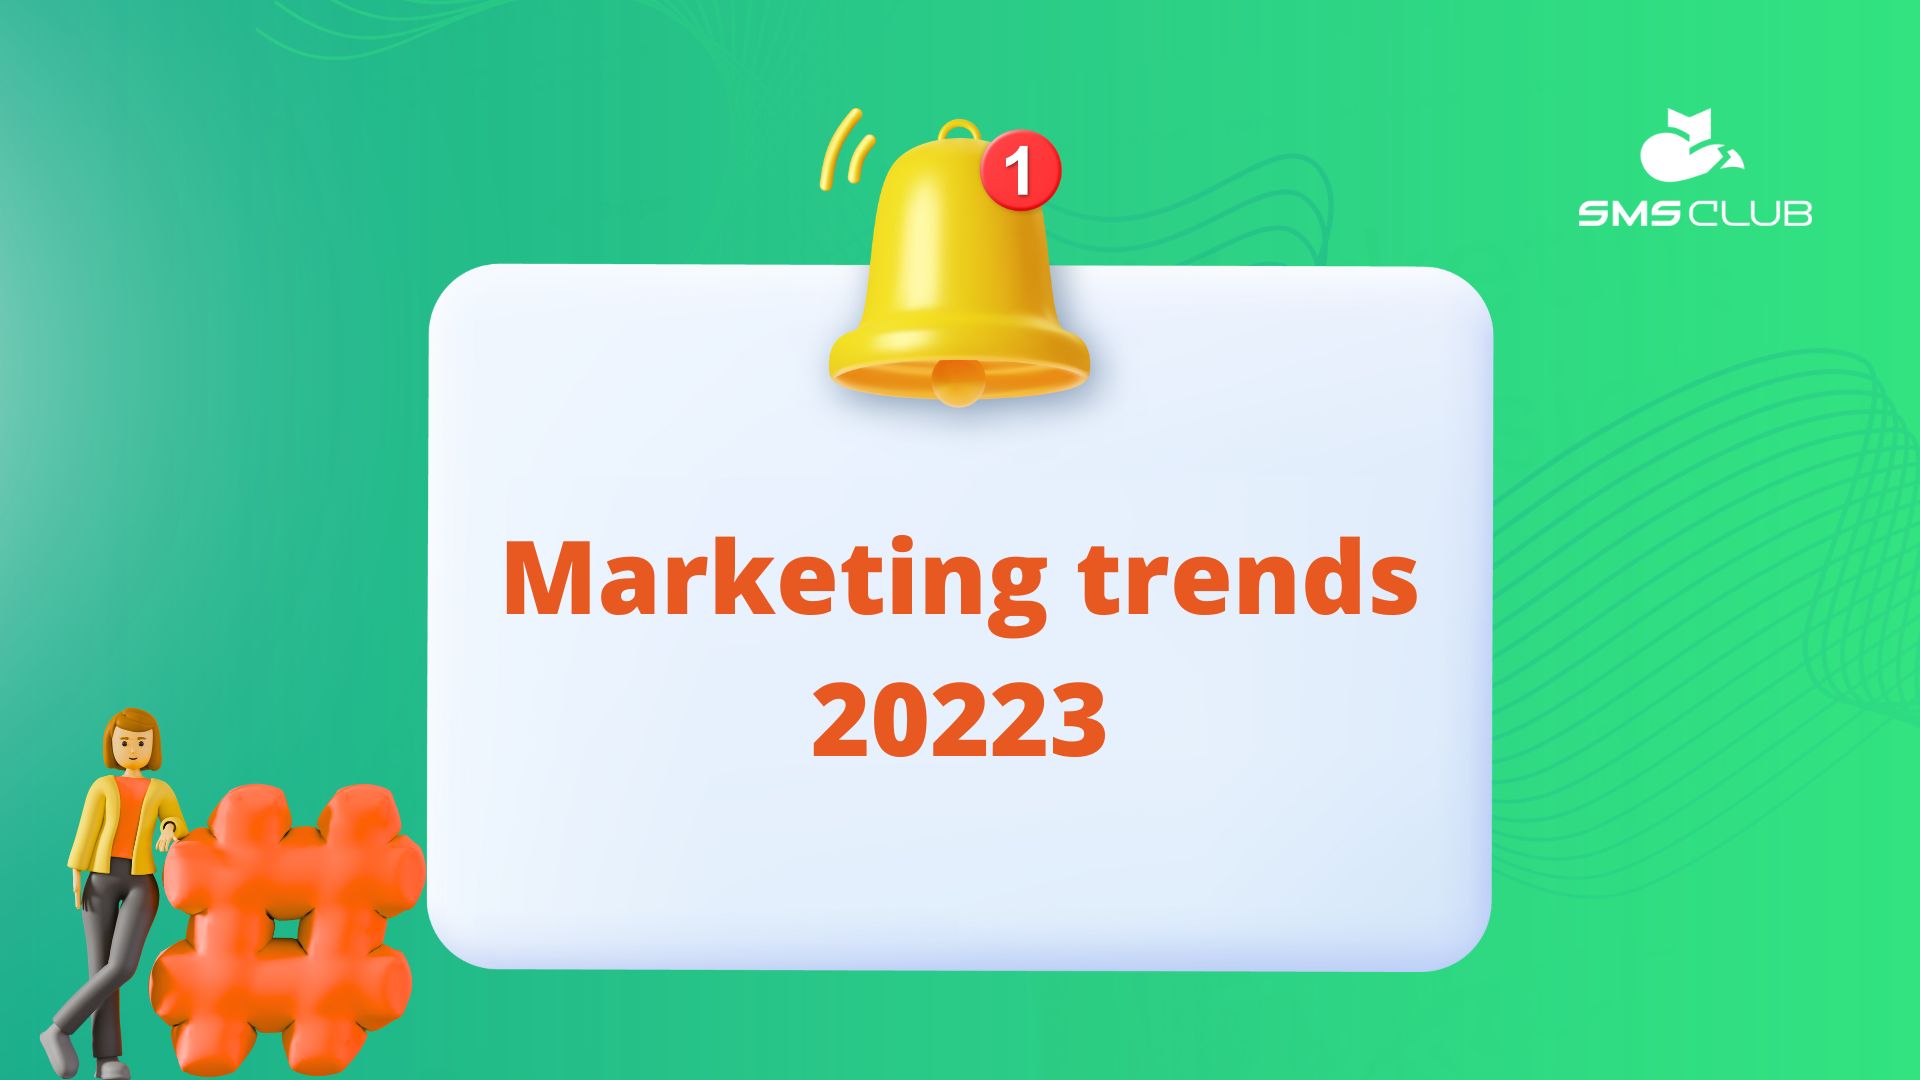 Marketing trends for 2023